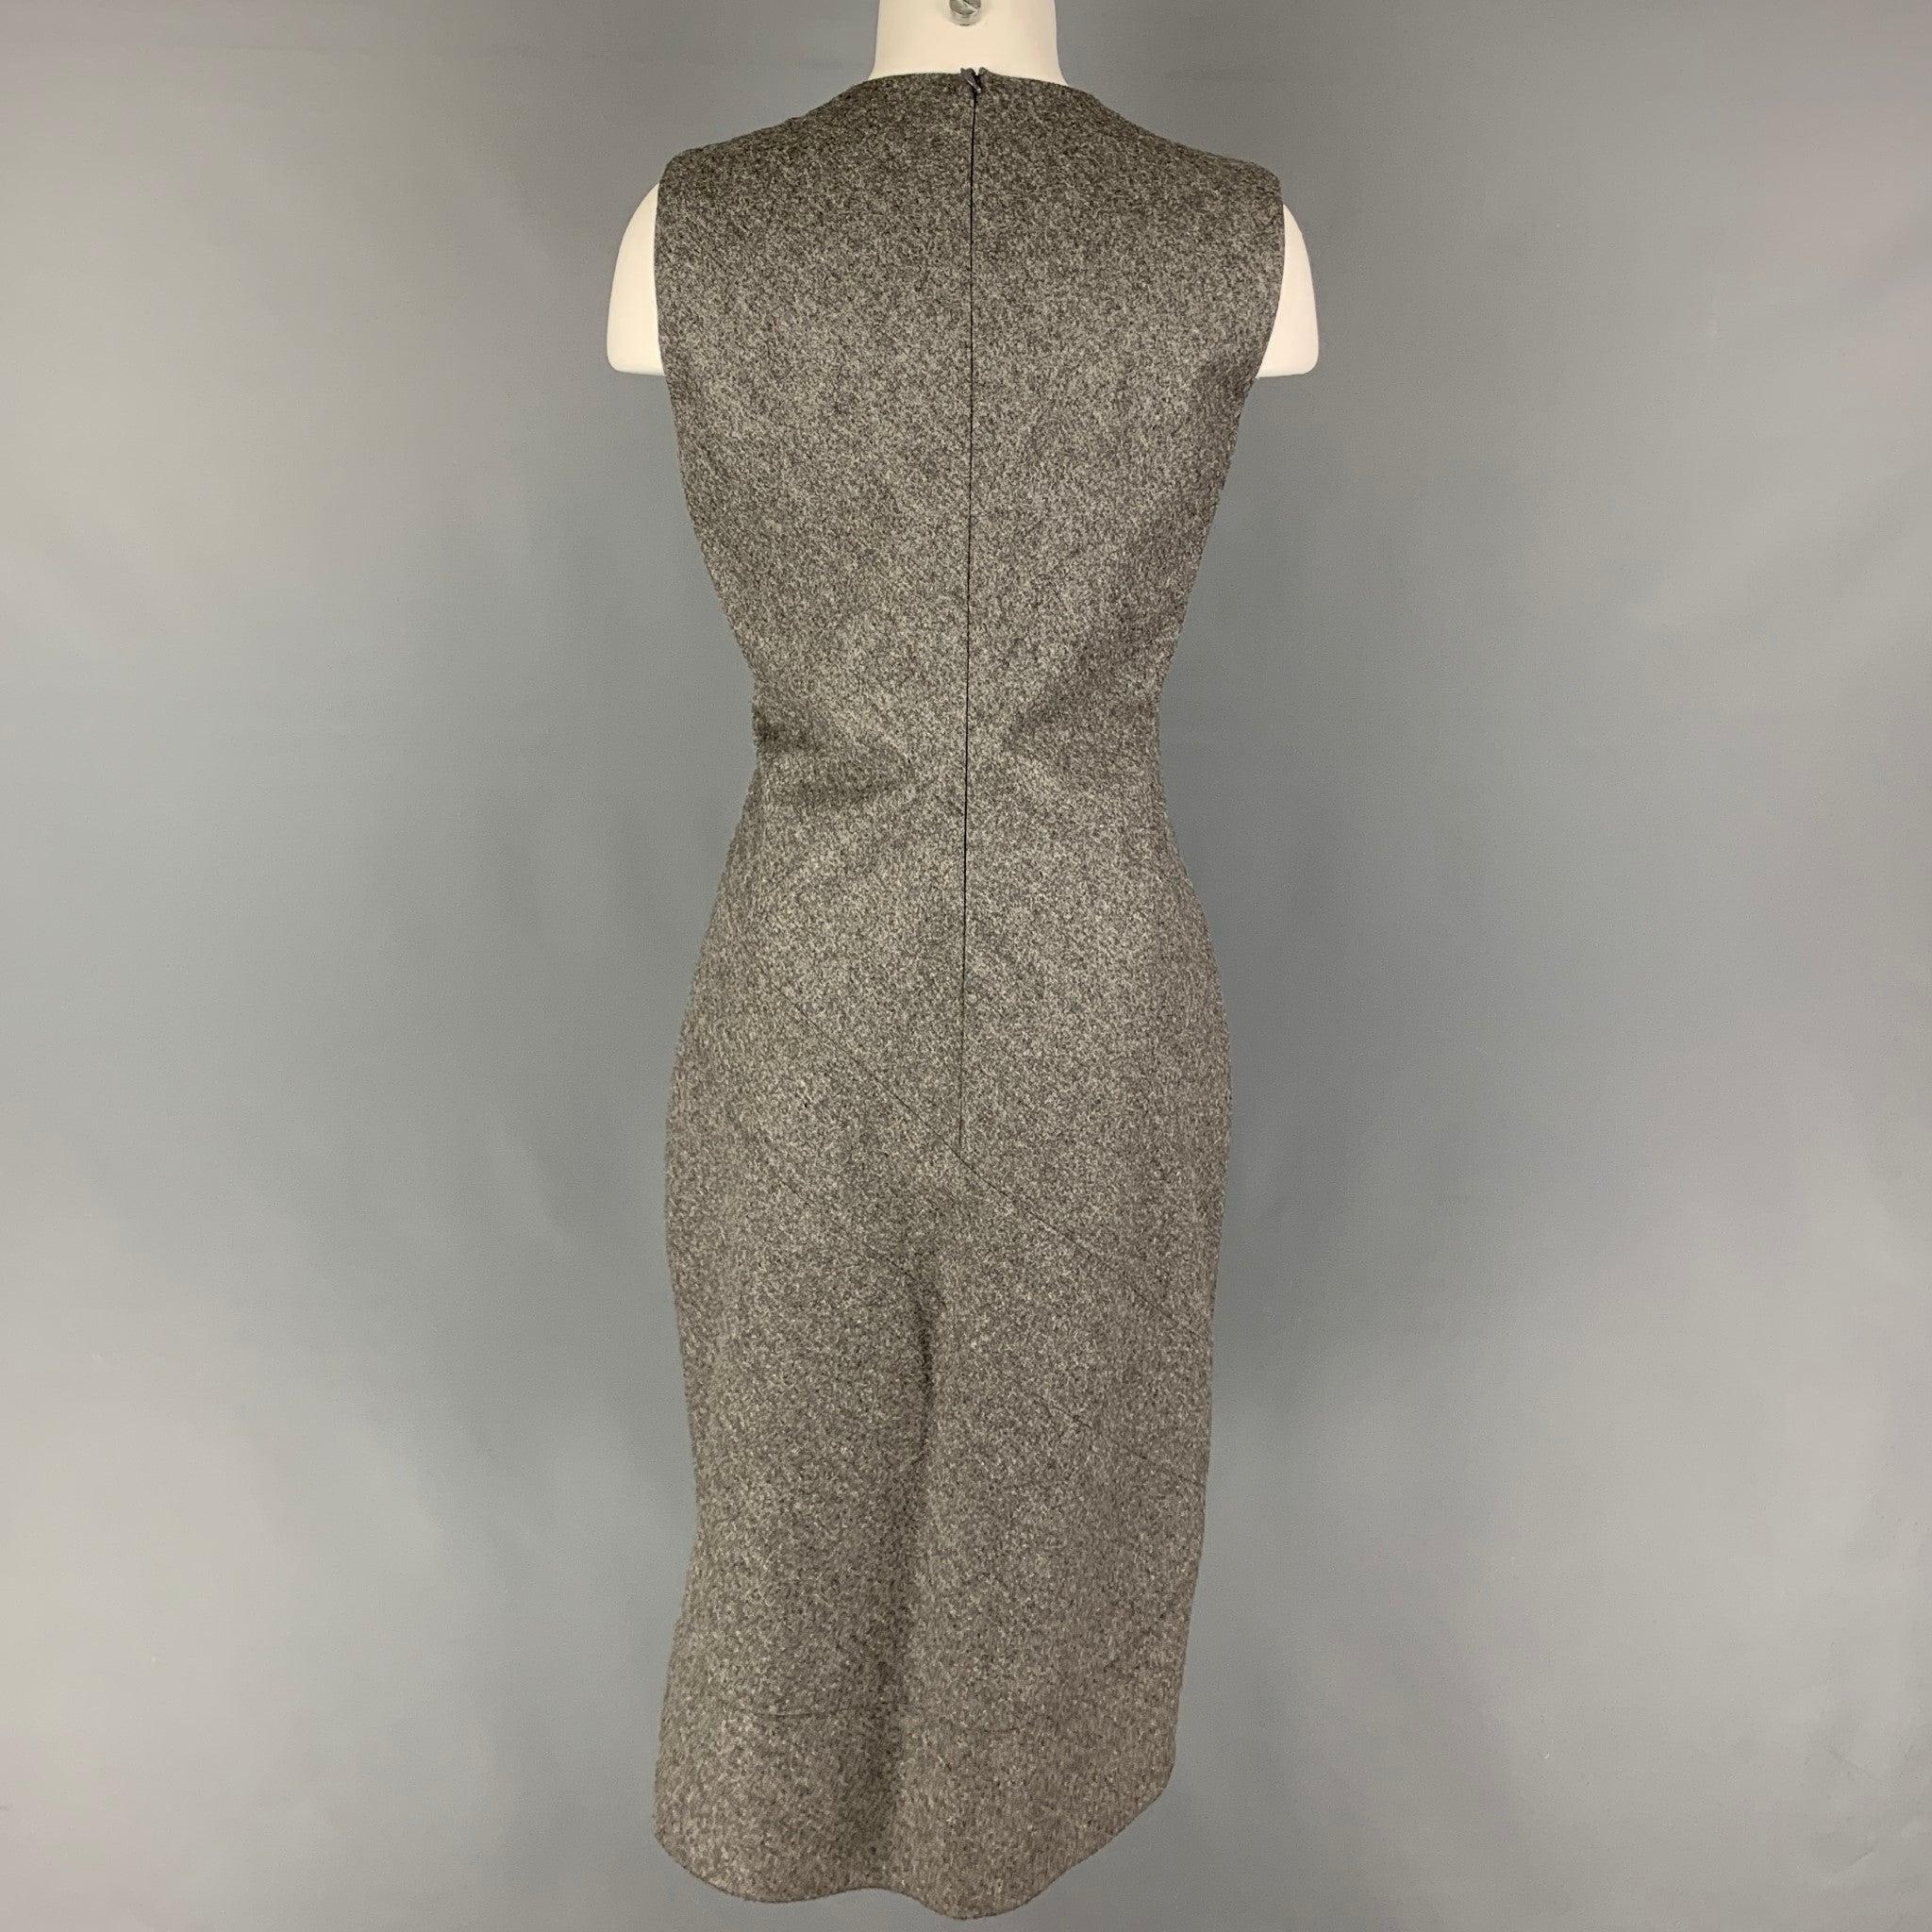 RICHARD TYLER Size 8 Grey Heather Virgin Wool Cashmere Heather Sleeveless Dress In Good Condition For Sale In San Francisco, CA